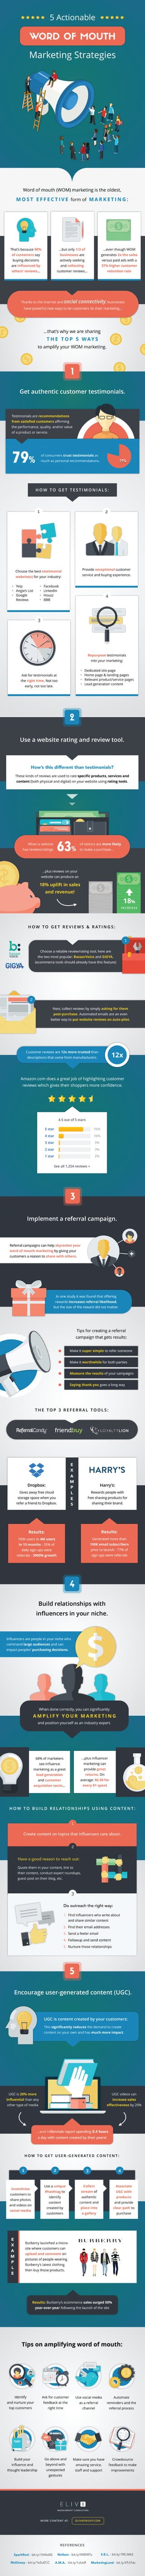 5 Actionable Word of Mouth Marketing Strategies (Infographic)